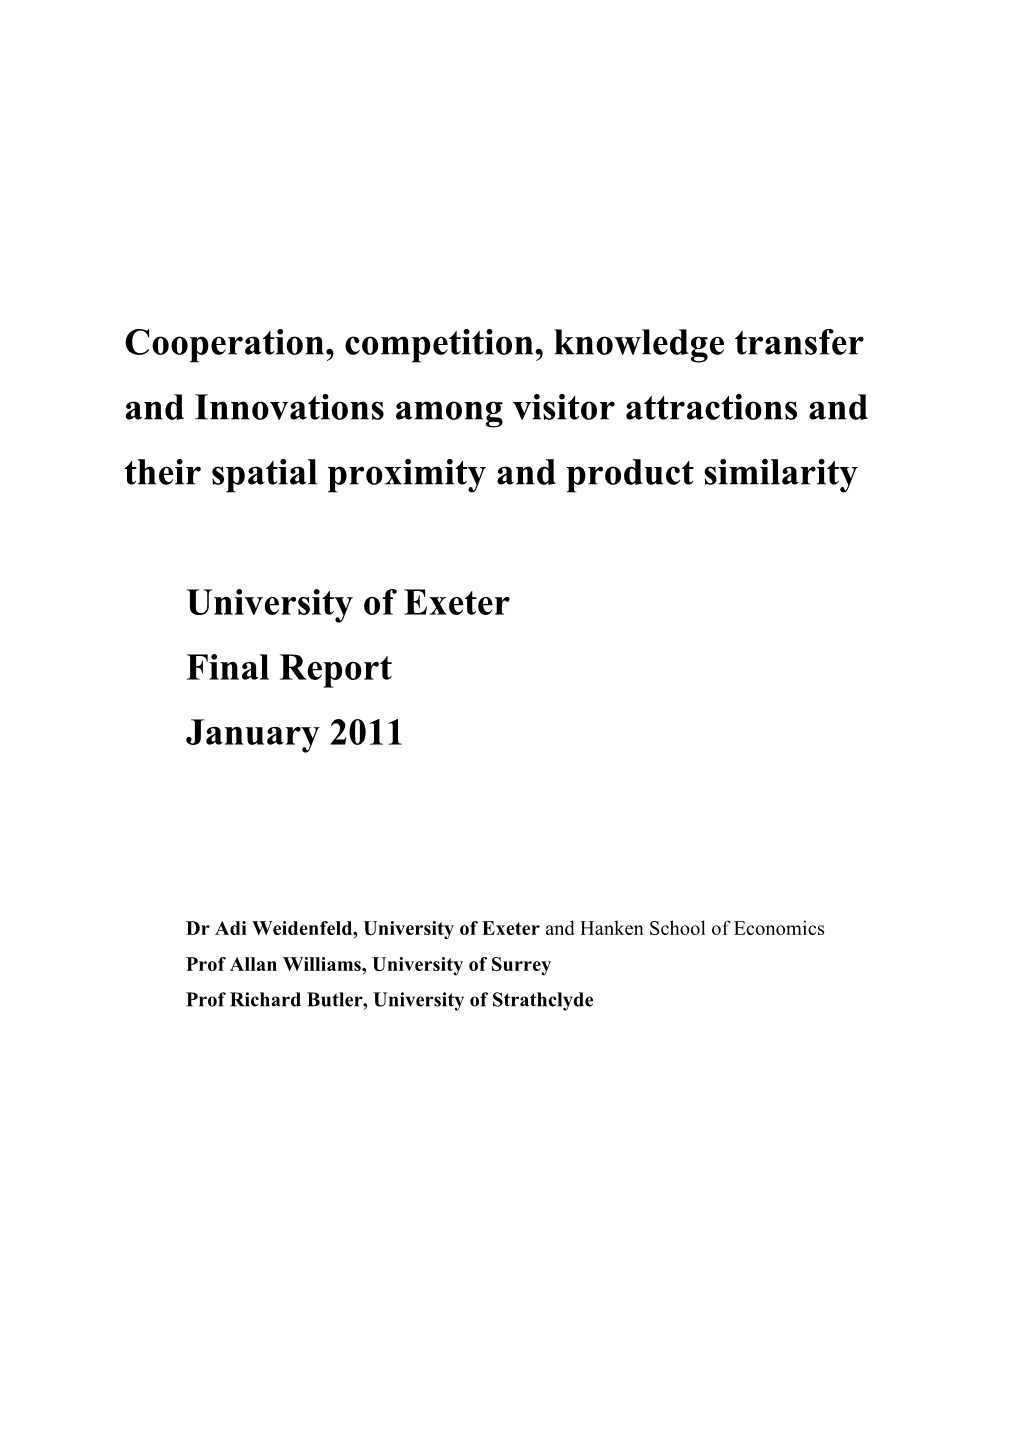 Cooperation, Competition, Knowledge Transfer and Innovations Among Visitor Attractions and Their Spatial Proximity and Product Similarity